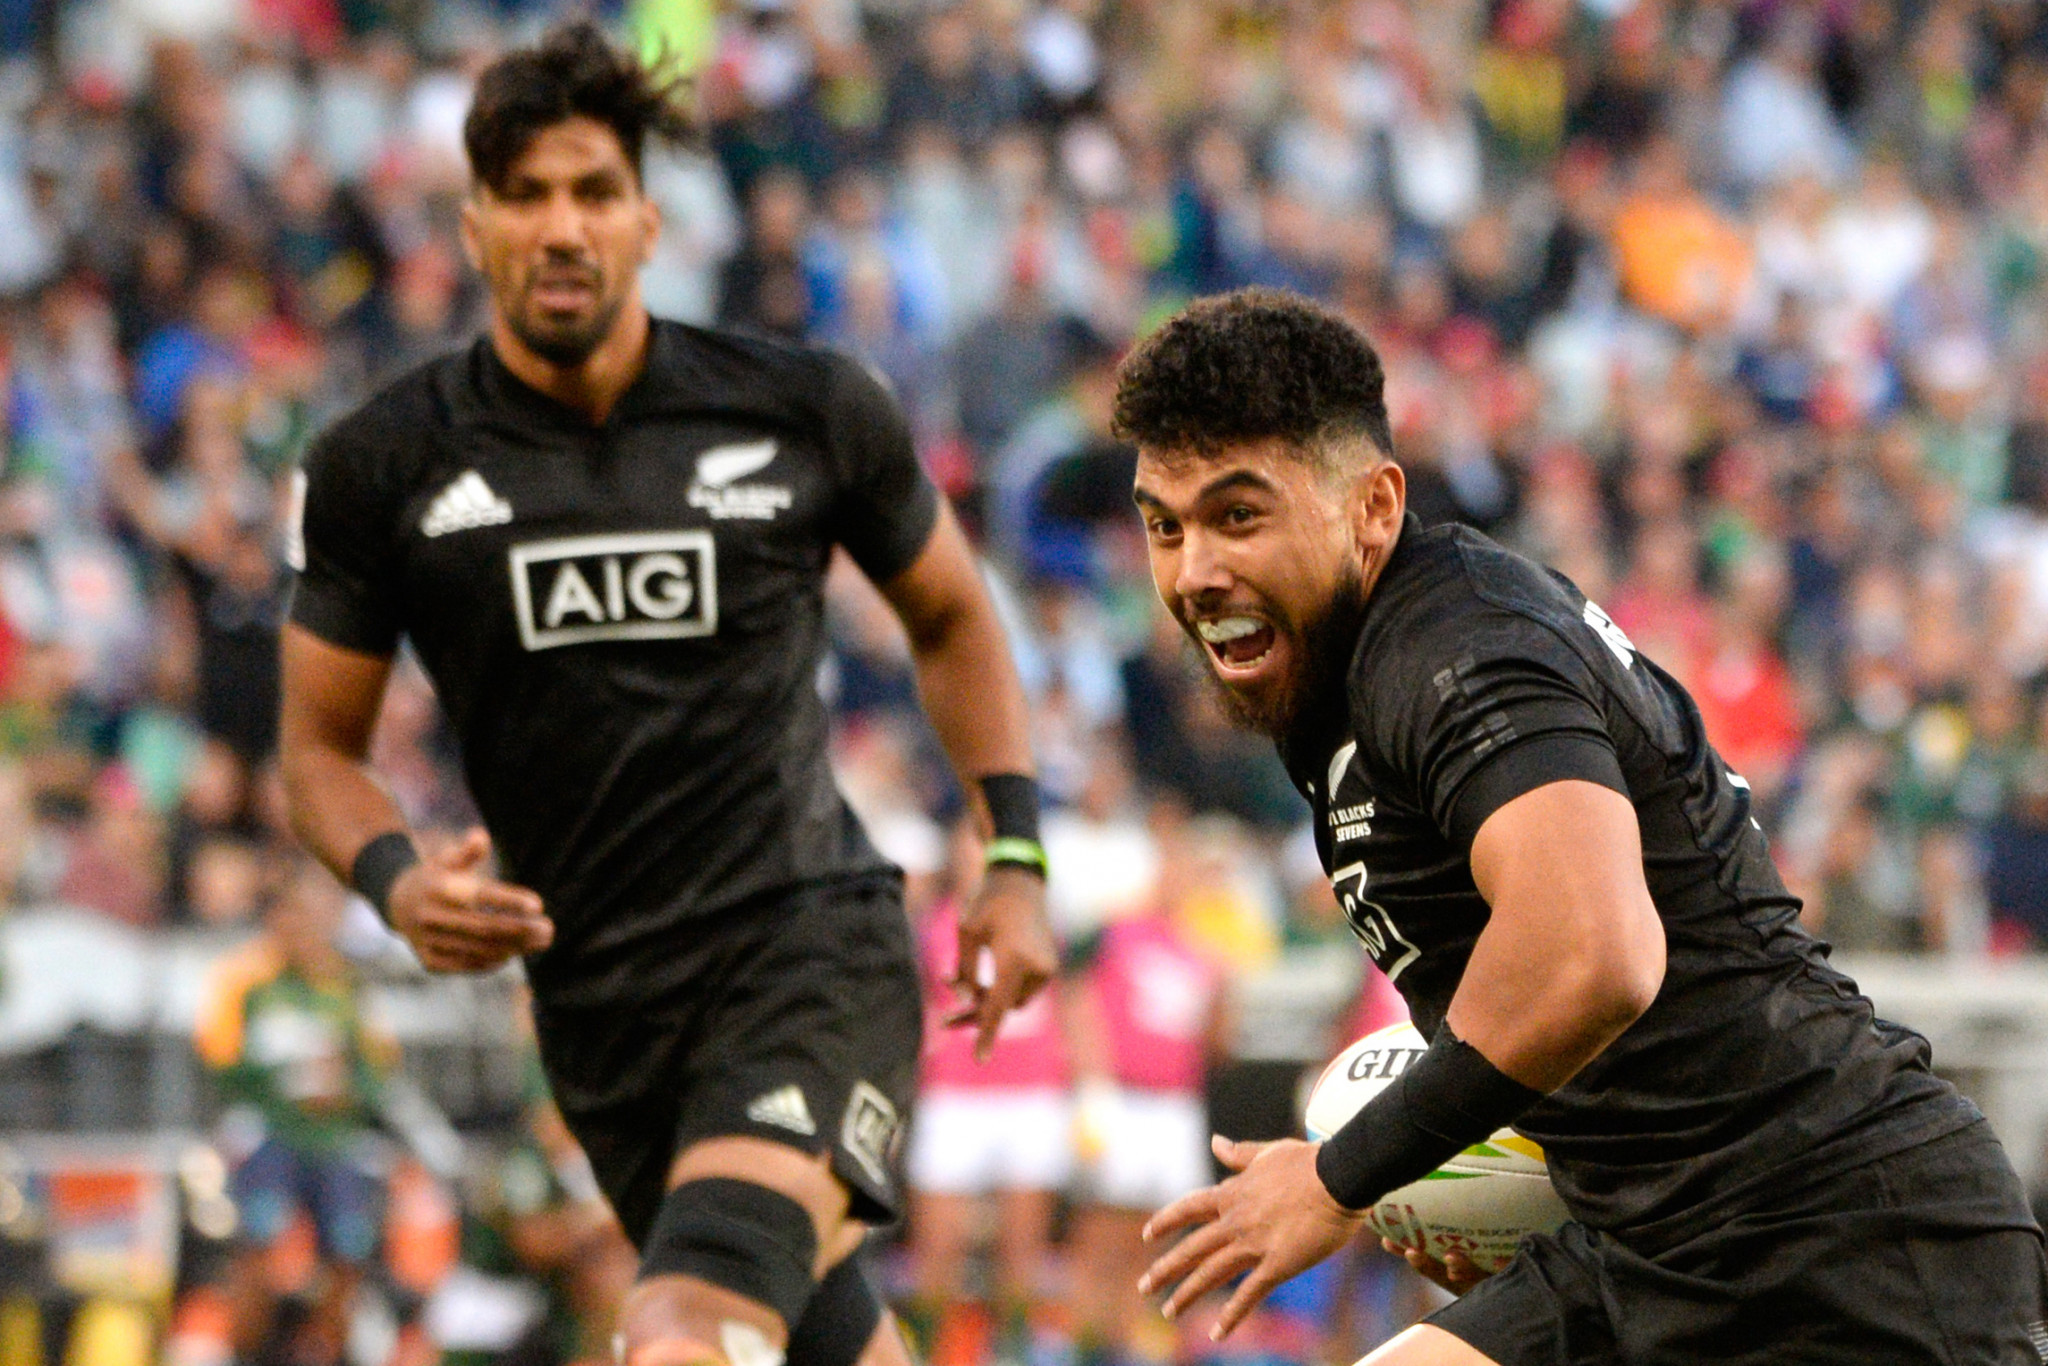 Hosts New Zealand will seek to build on their success so far in the World Rugby Sevens Series ©Getty Images